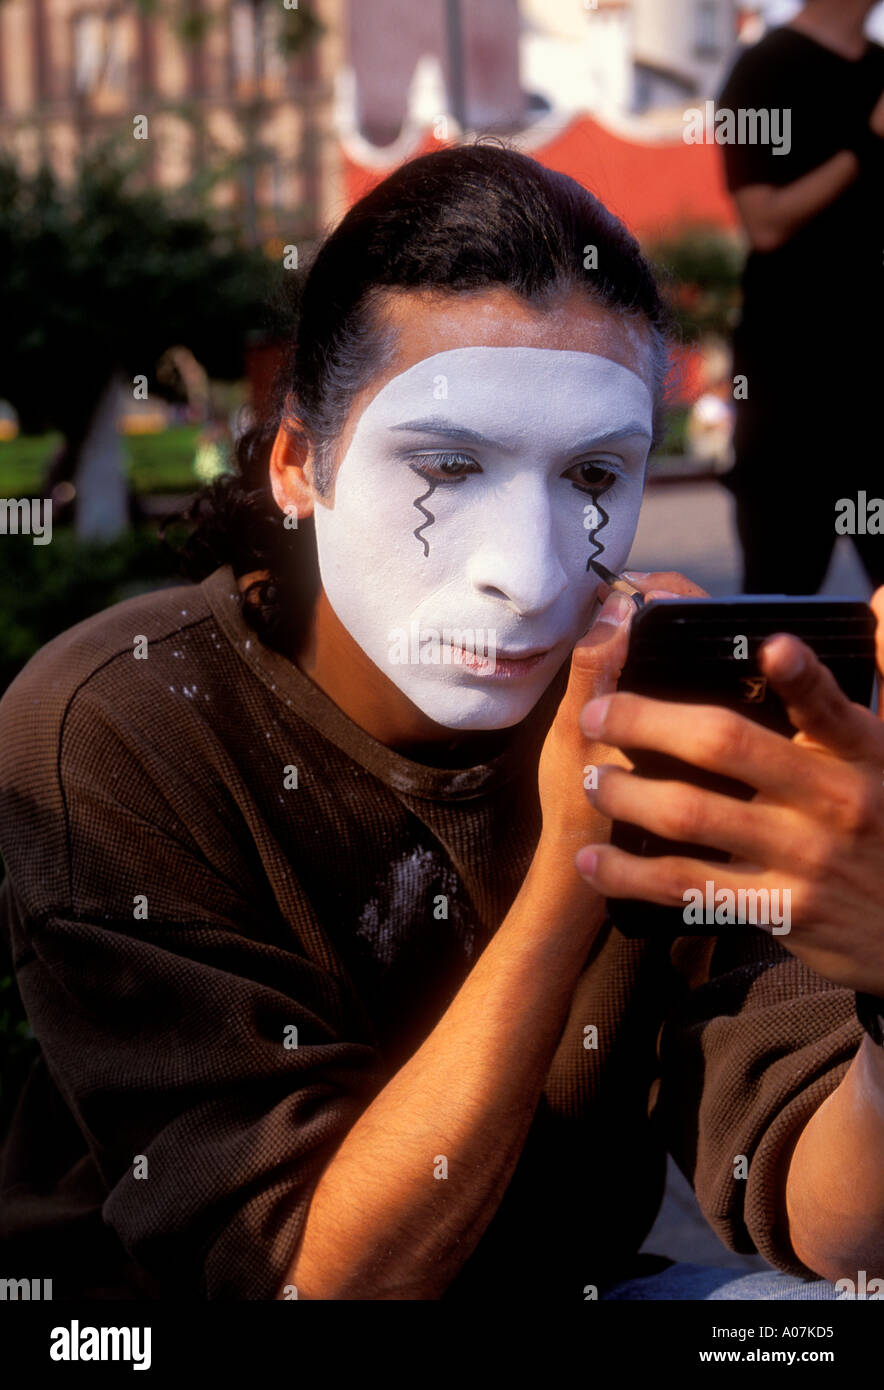 1, one, Mexican man, young adult man, mime, face painting, applying make-up, Plaza Hidalgo, Coyoacan, Mexico City, Federal District, Mexico Stock Photo